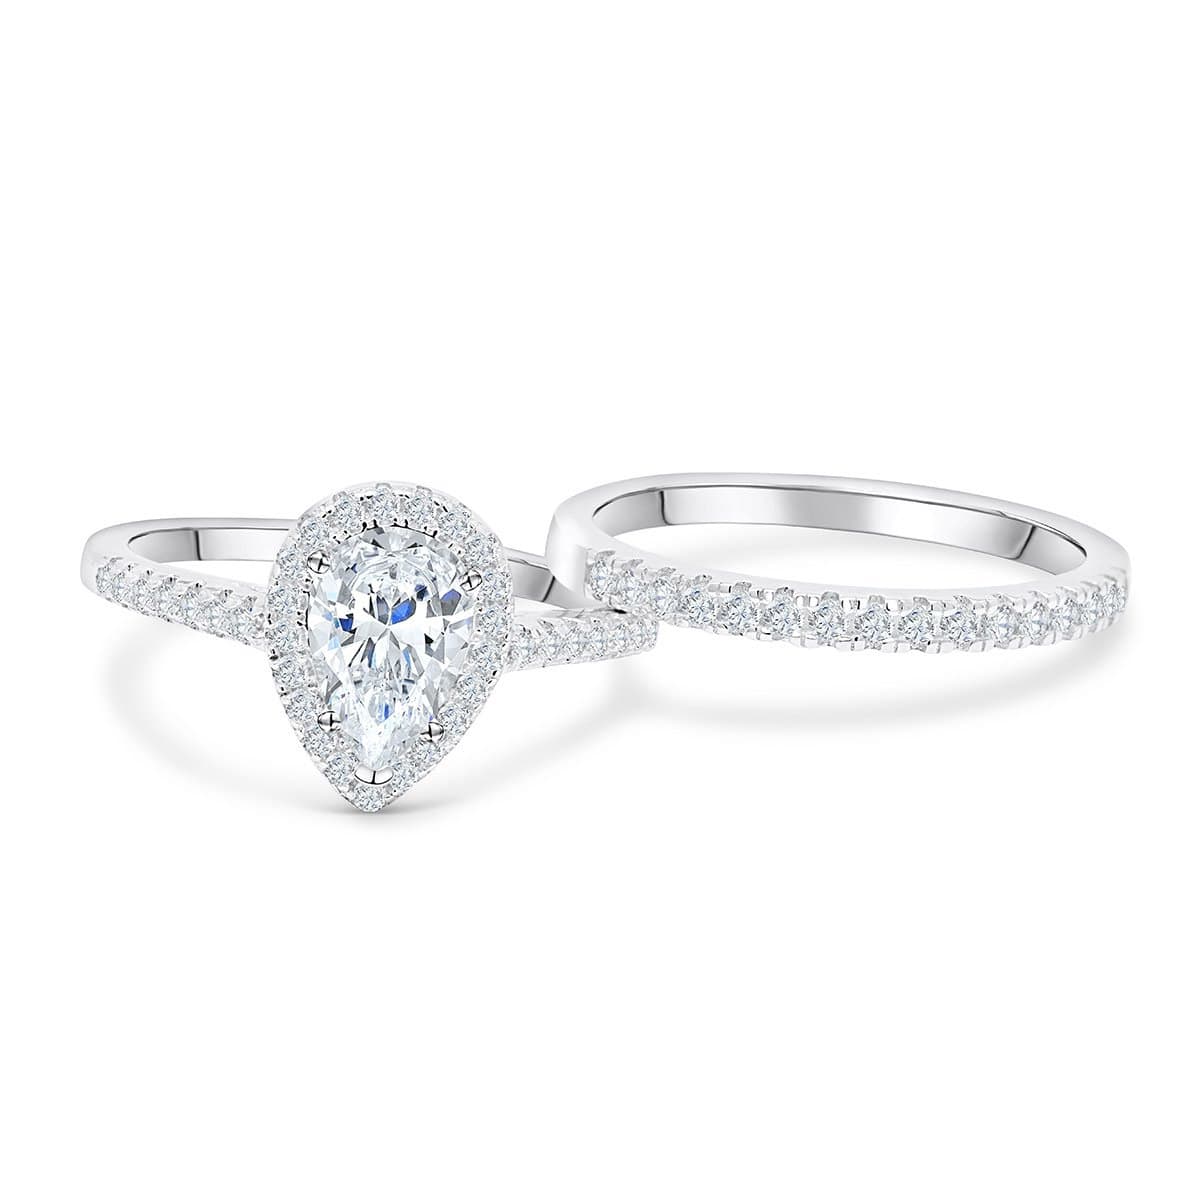 the bliss pear shaped engagement ring